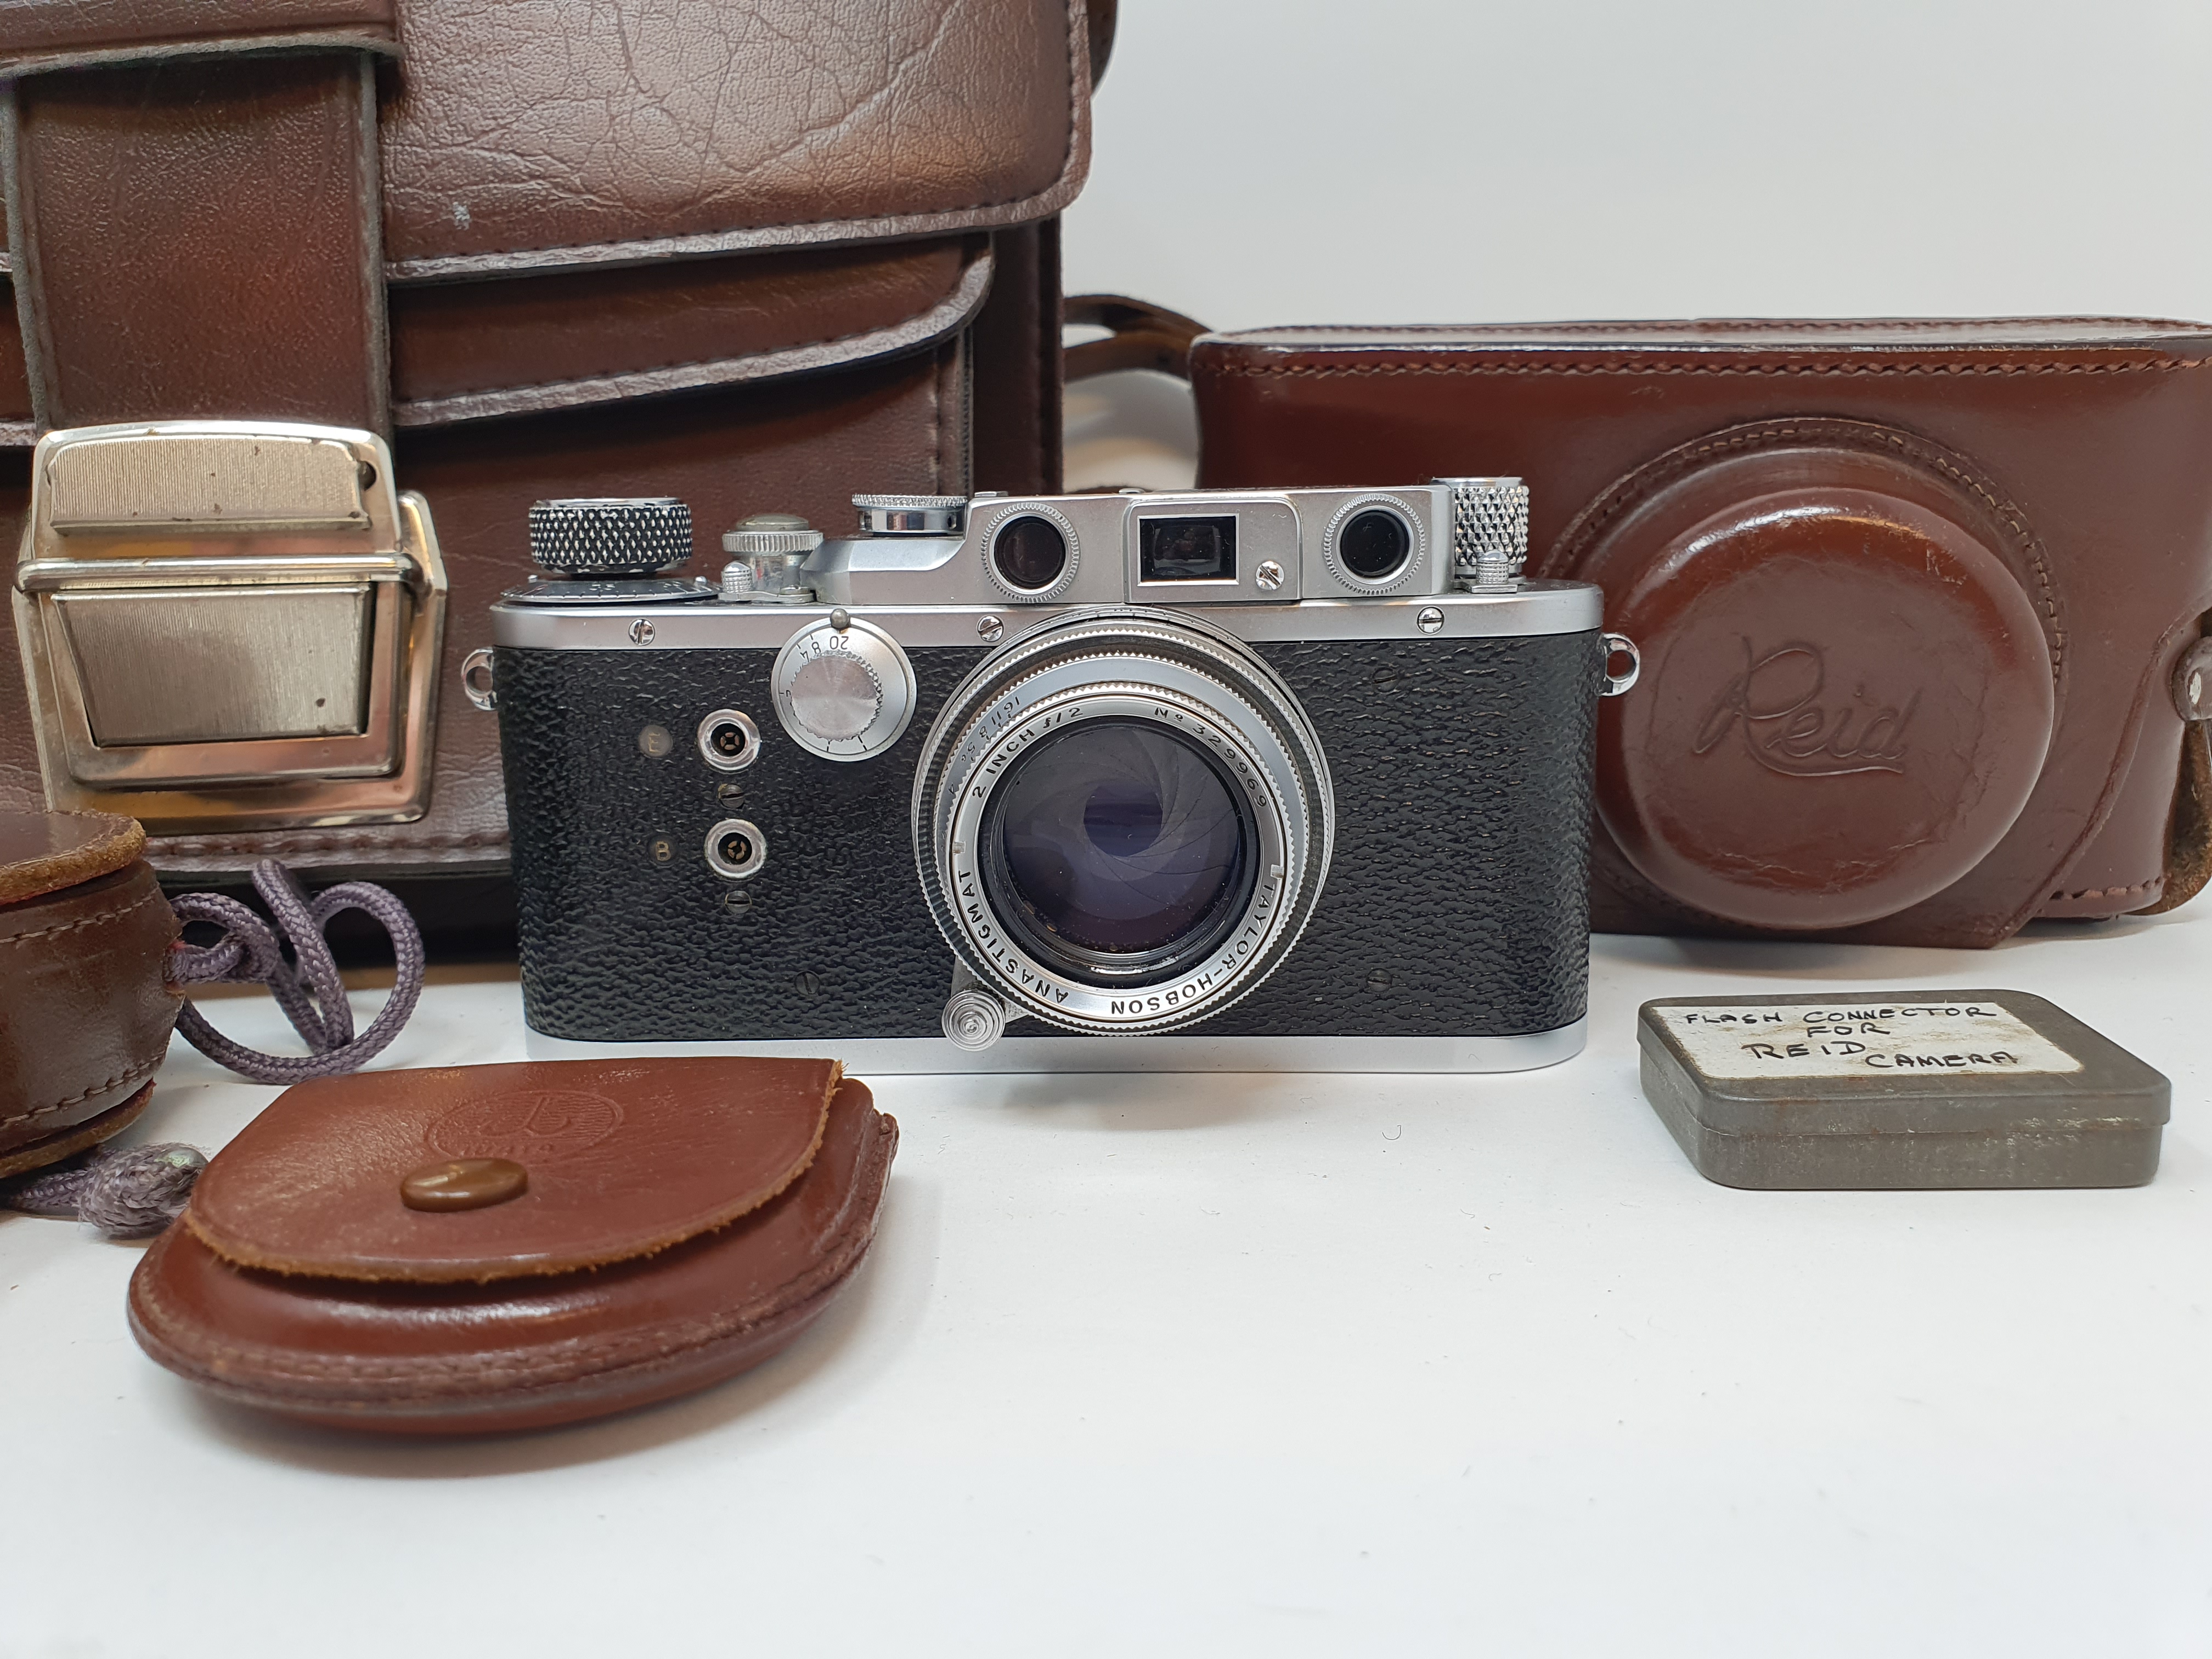 A Reid & Sigrist ltd camera, serial number P2750, with leather outer case, lens, and accessories